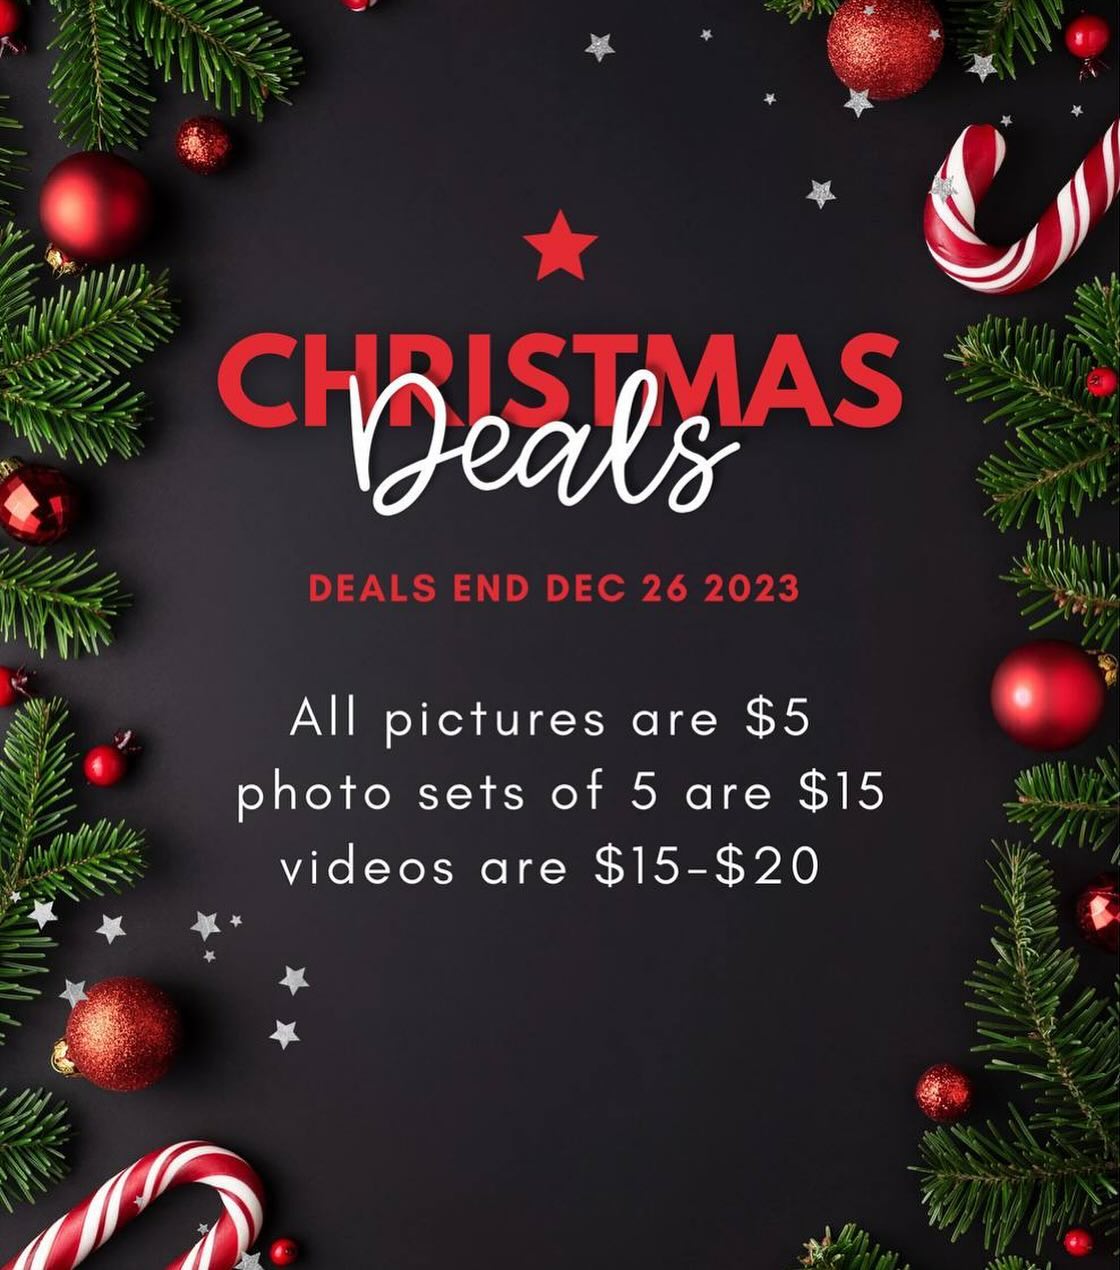 Check out all my Christmas deals! Dm me to get these specials before they’re gone!! 💋❤️